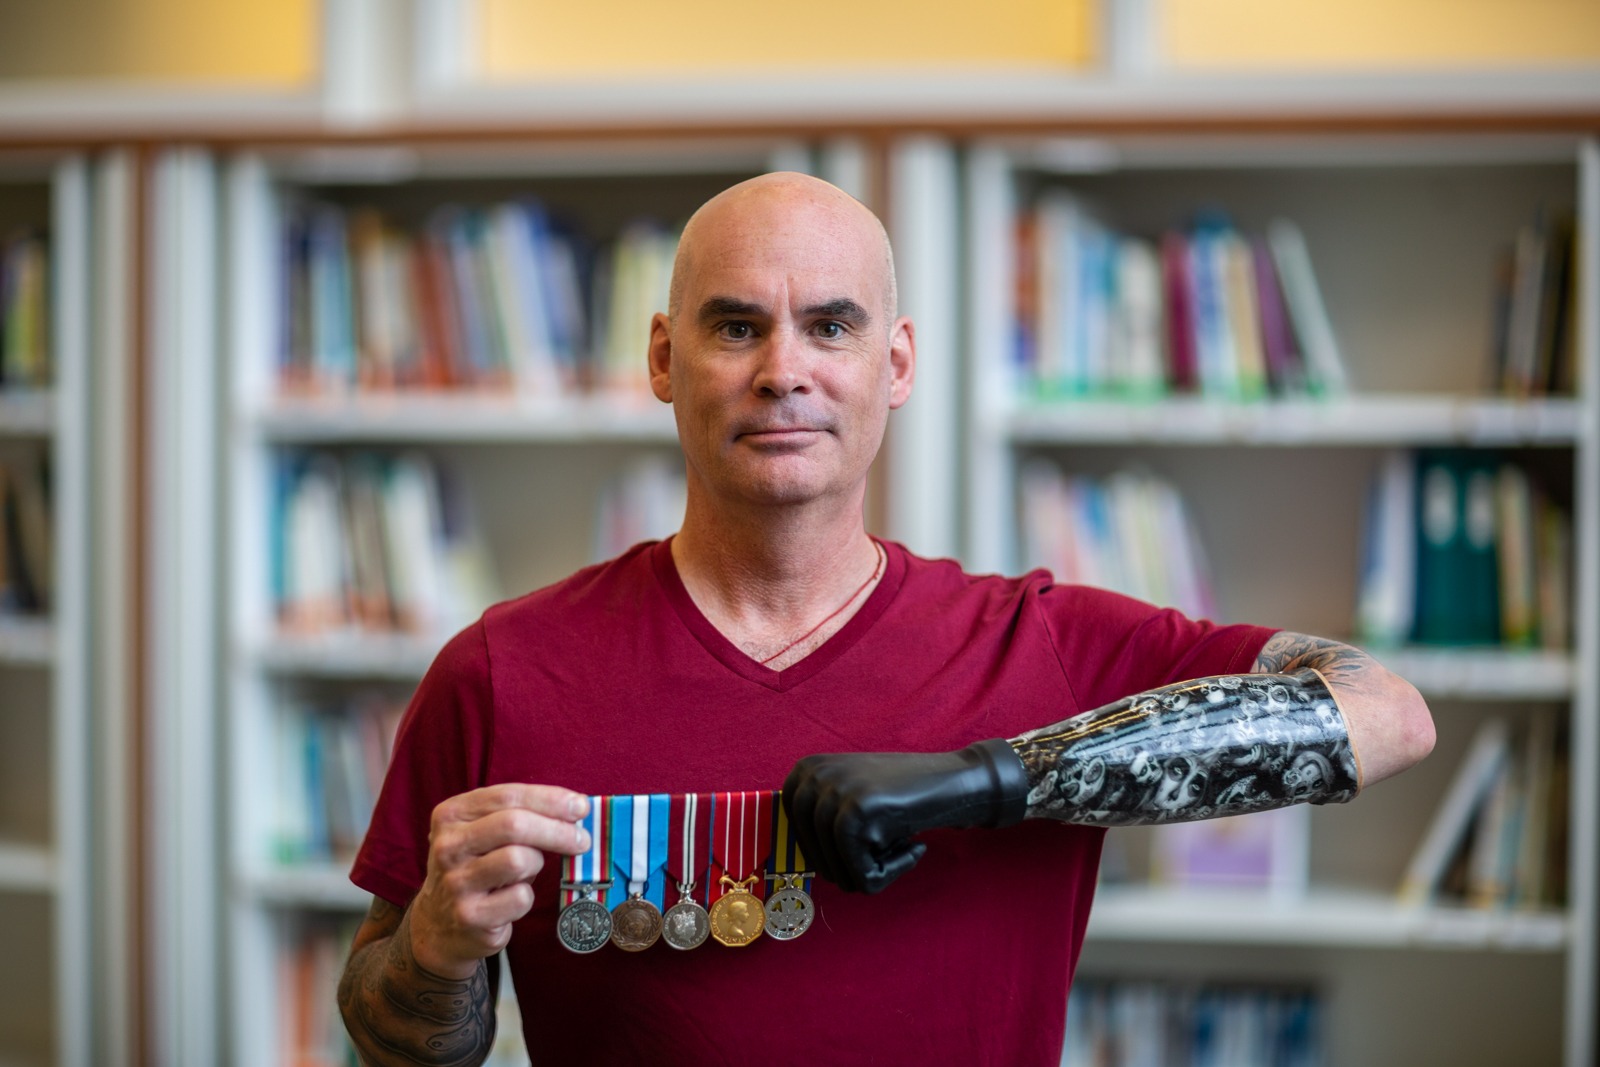 Craig holds his medals with his myoelectric hand 